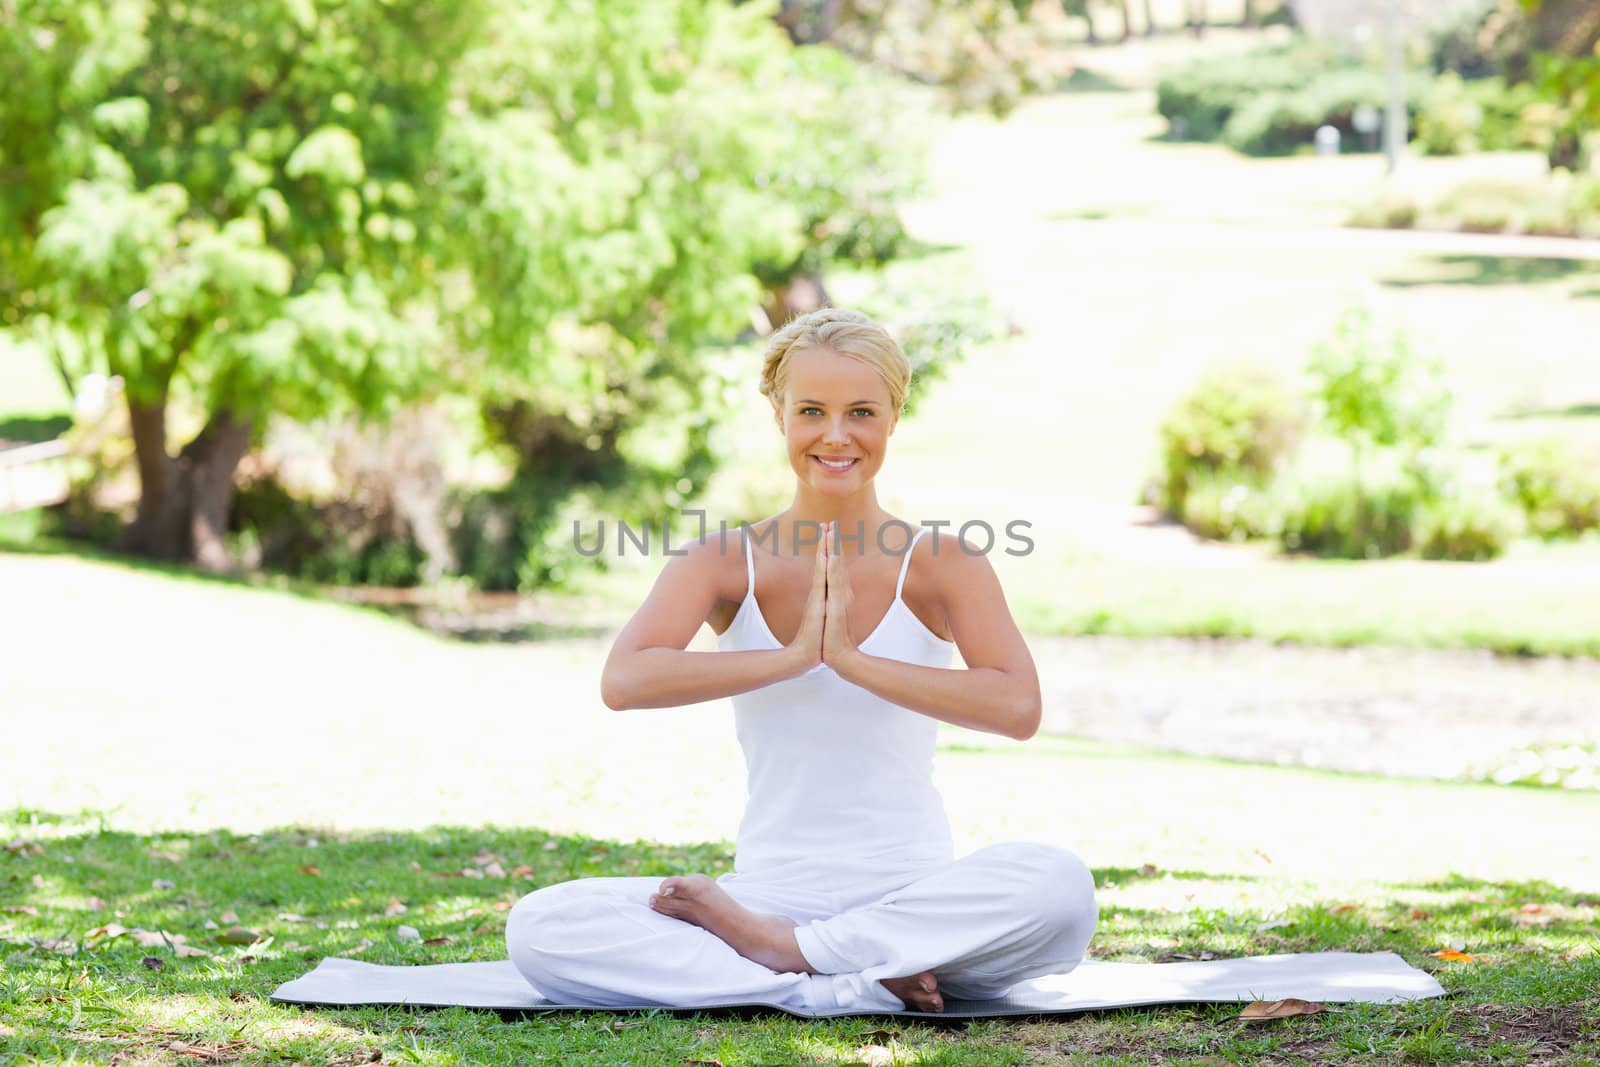 Smiling young woman sitting in a yoga position on the lawn